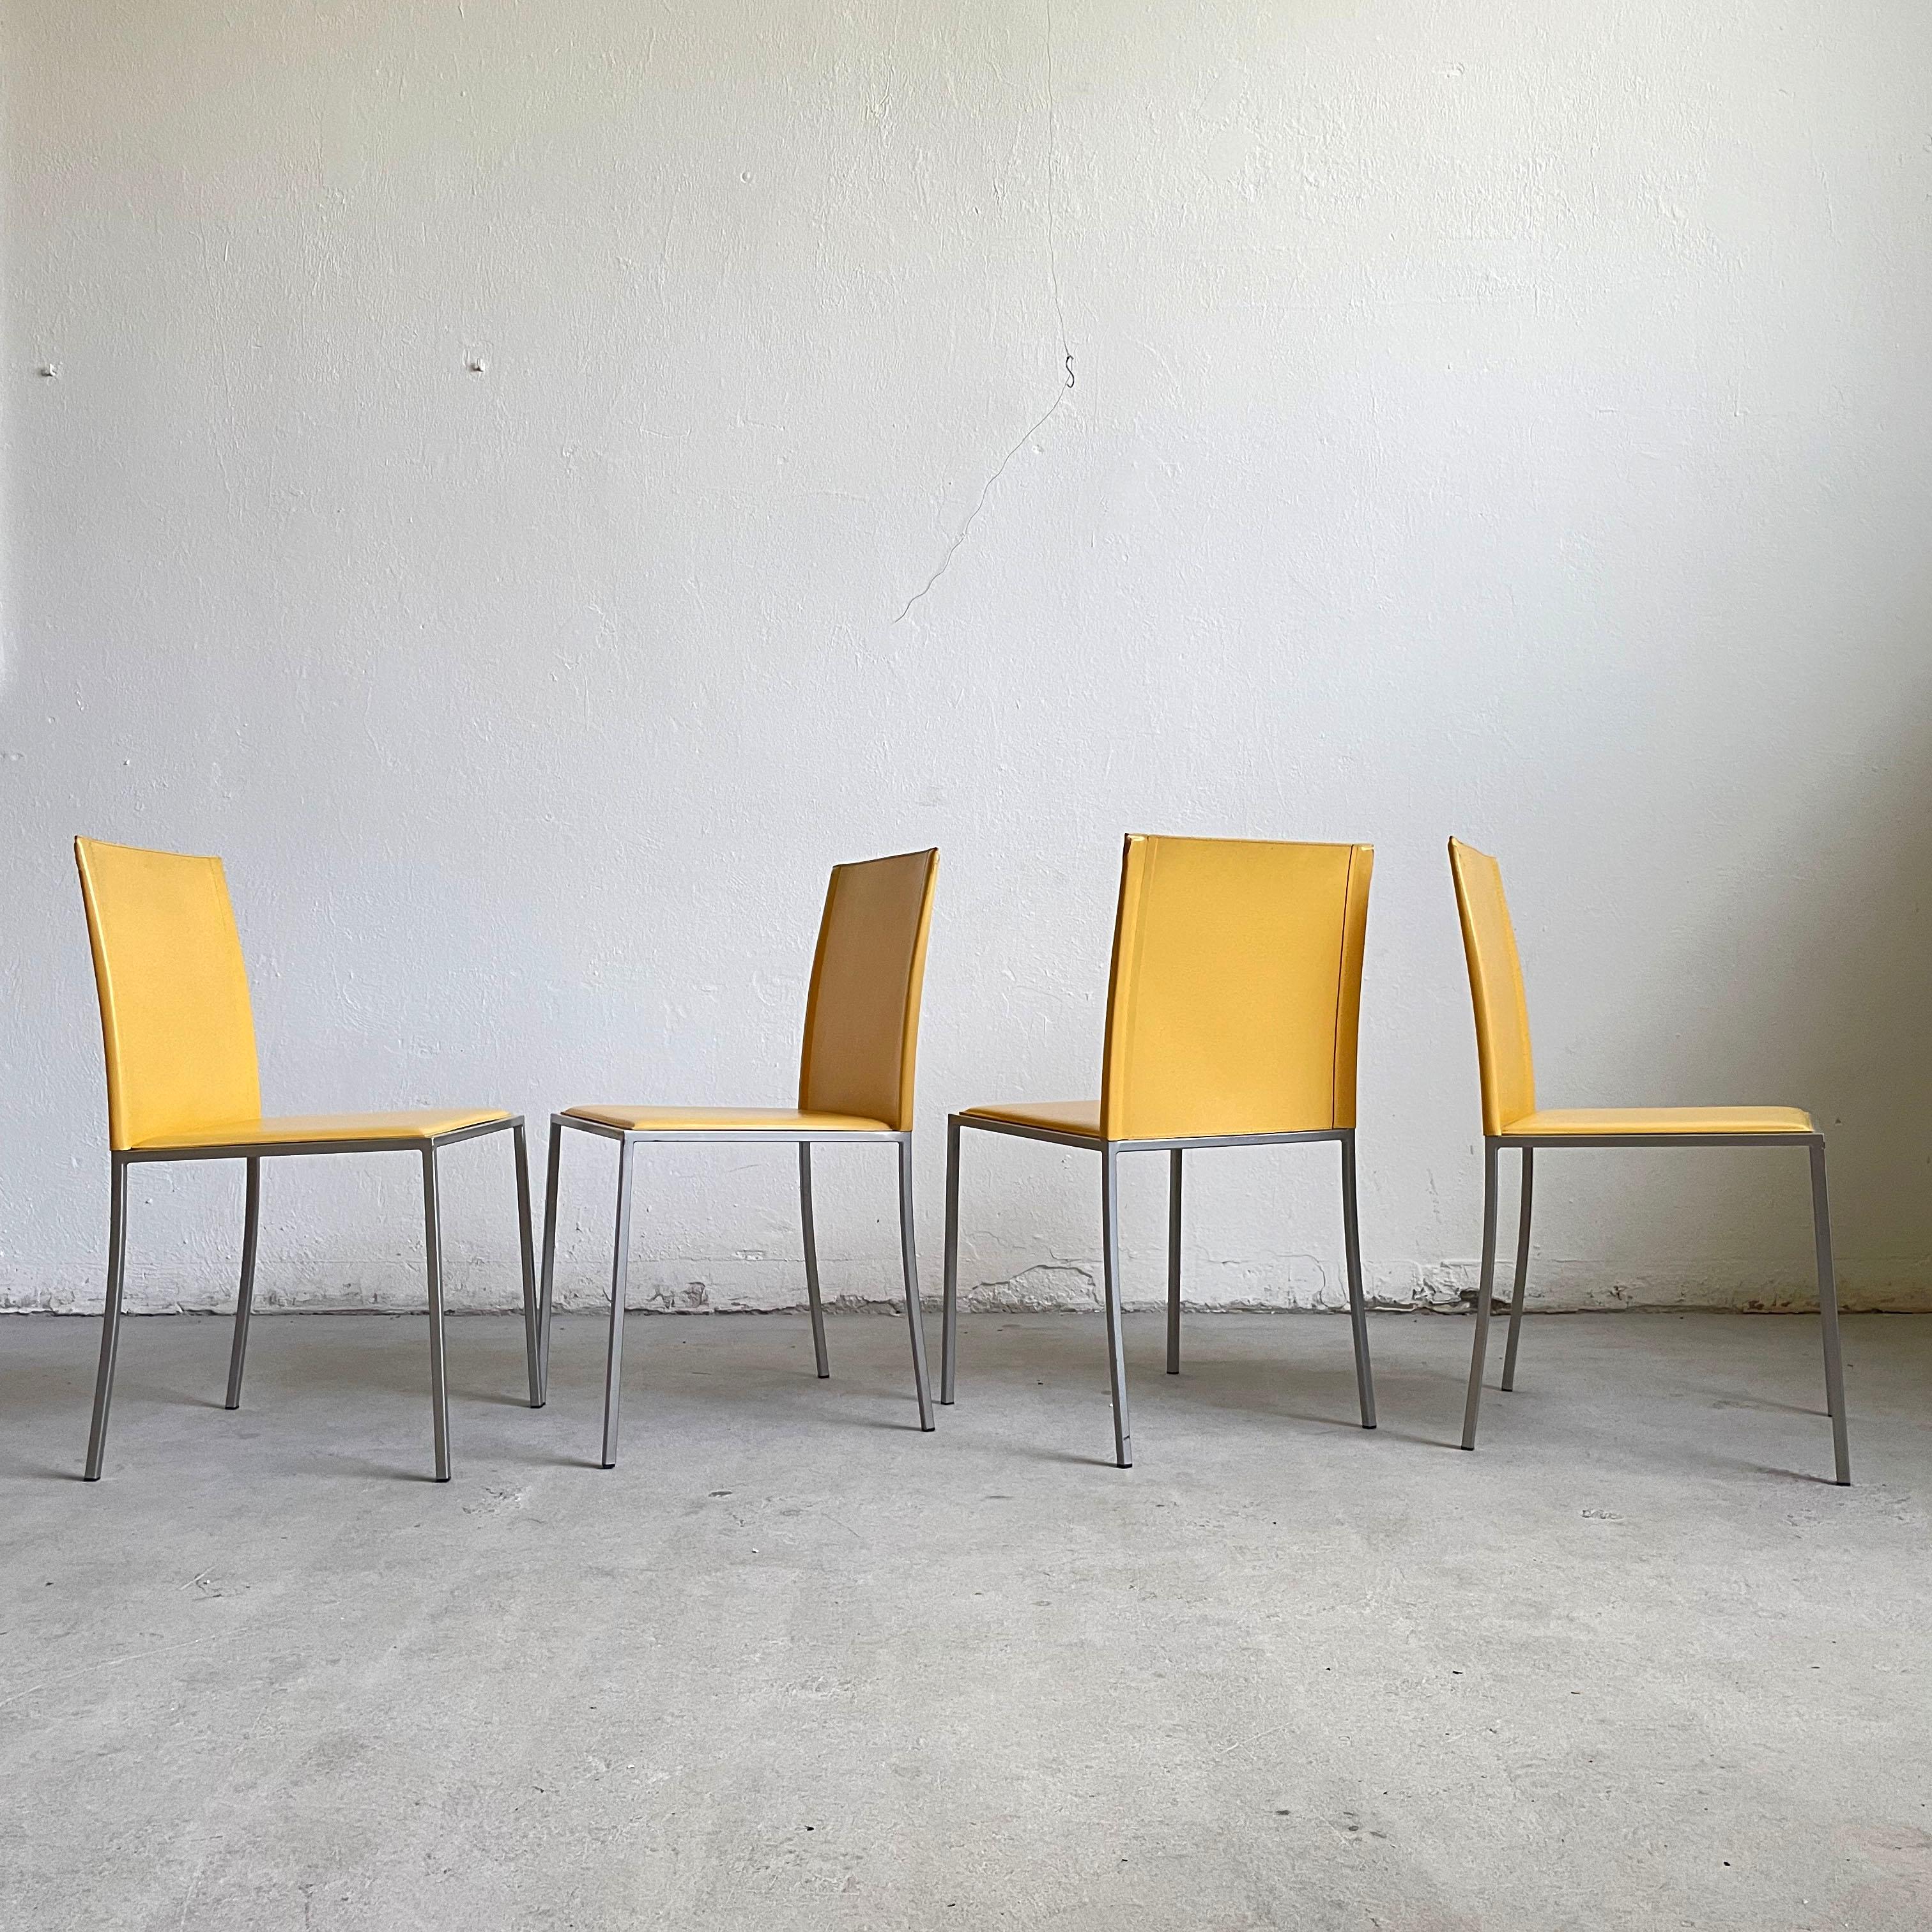 Set of 4 Italian Minimalist Modernist Leather Chairs by Calligaris, Italy 1990s For Sale 2